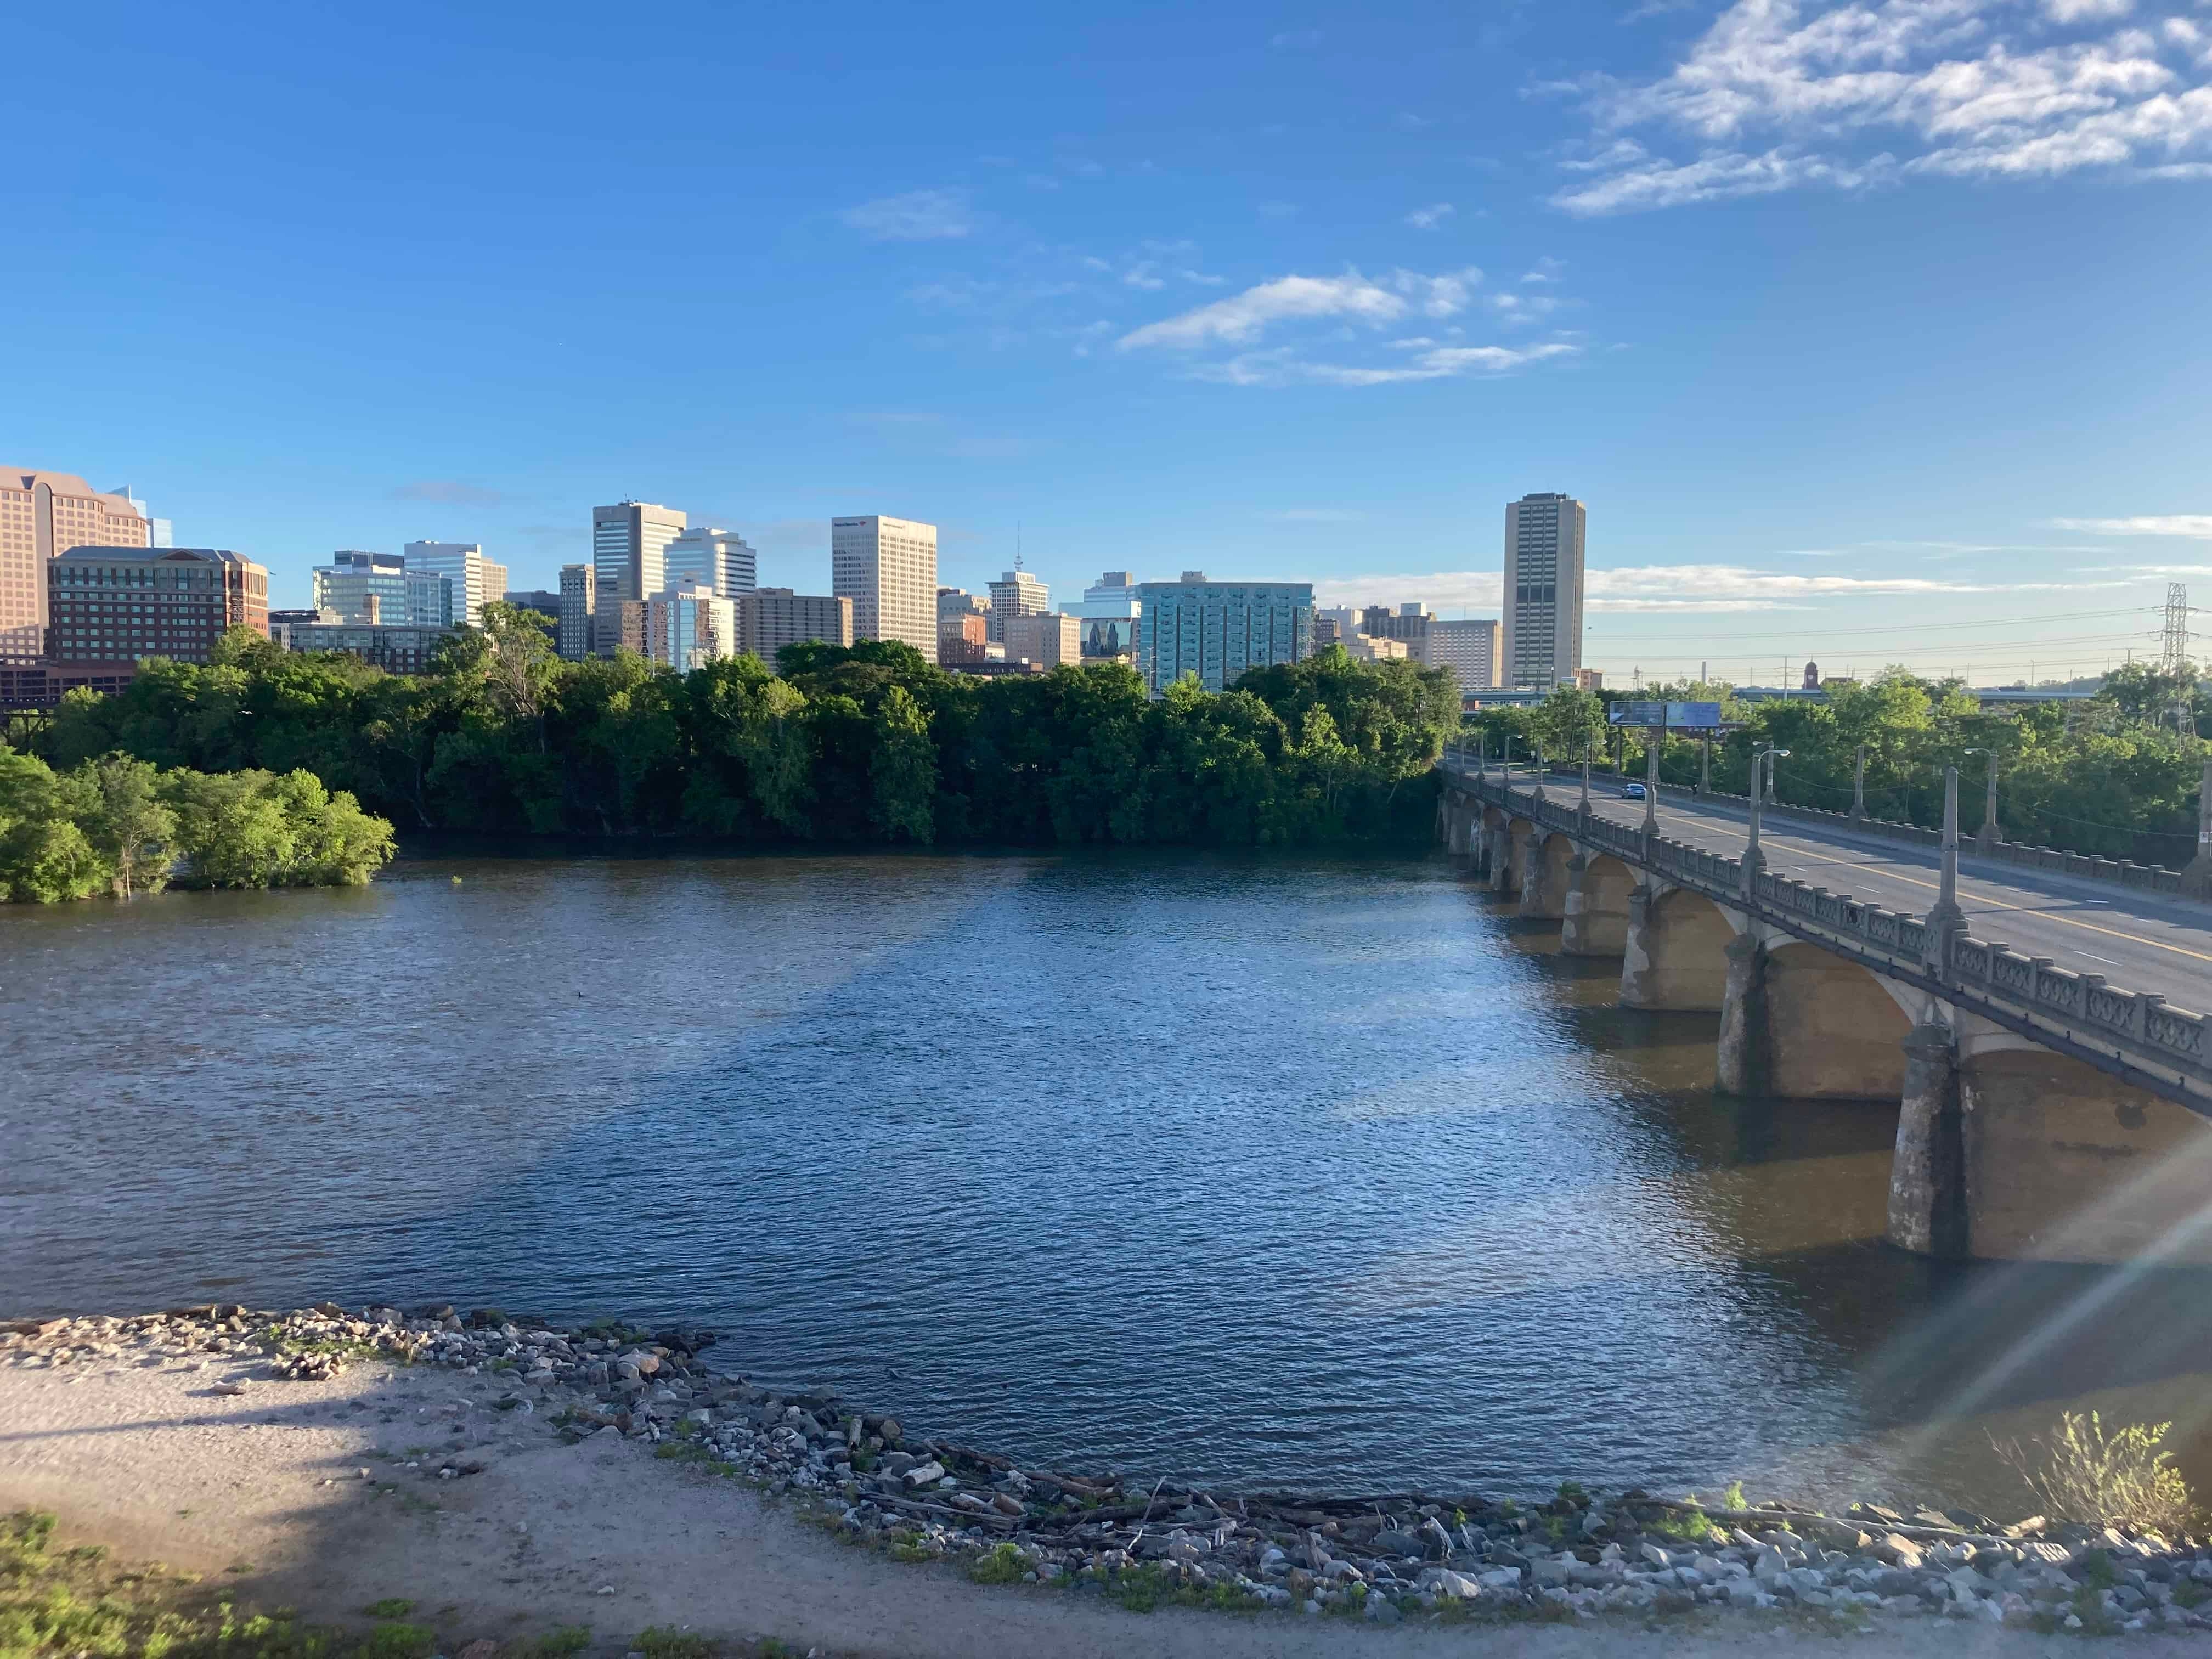 The skyline of Richmond, VA as viewed from south of the James River.